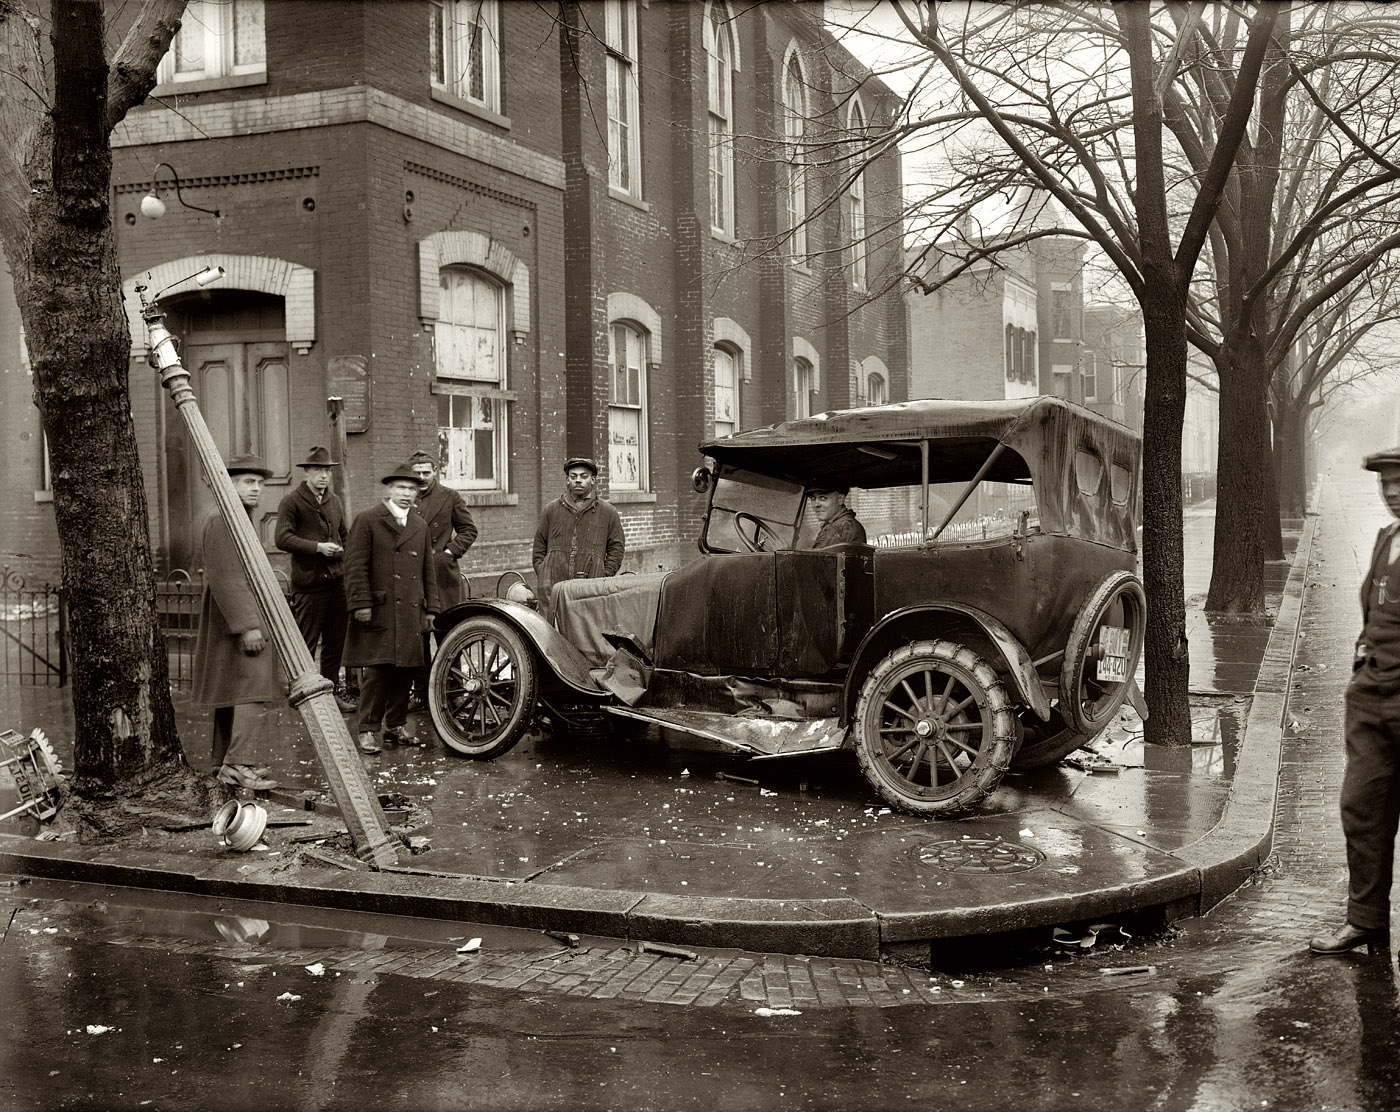 Another view of that 1921 car wreck at the intersection of 10th and R streets N.W. in Washington, D.C. National Photo Company glass negative. View full size.